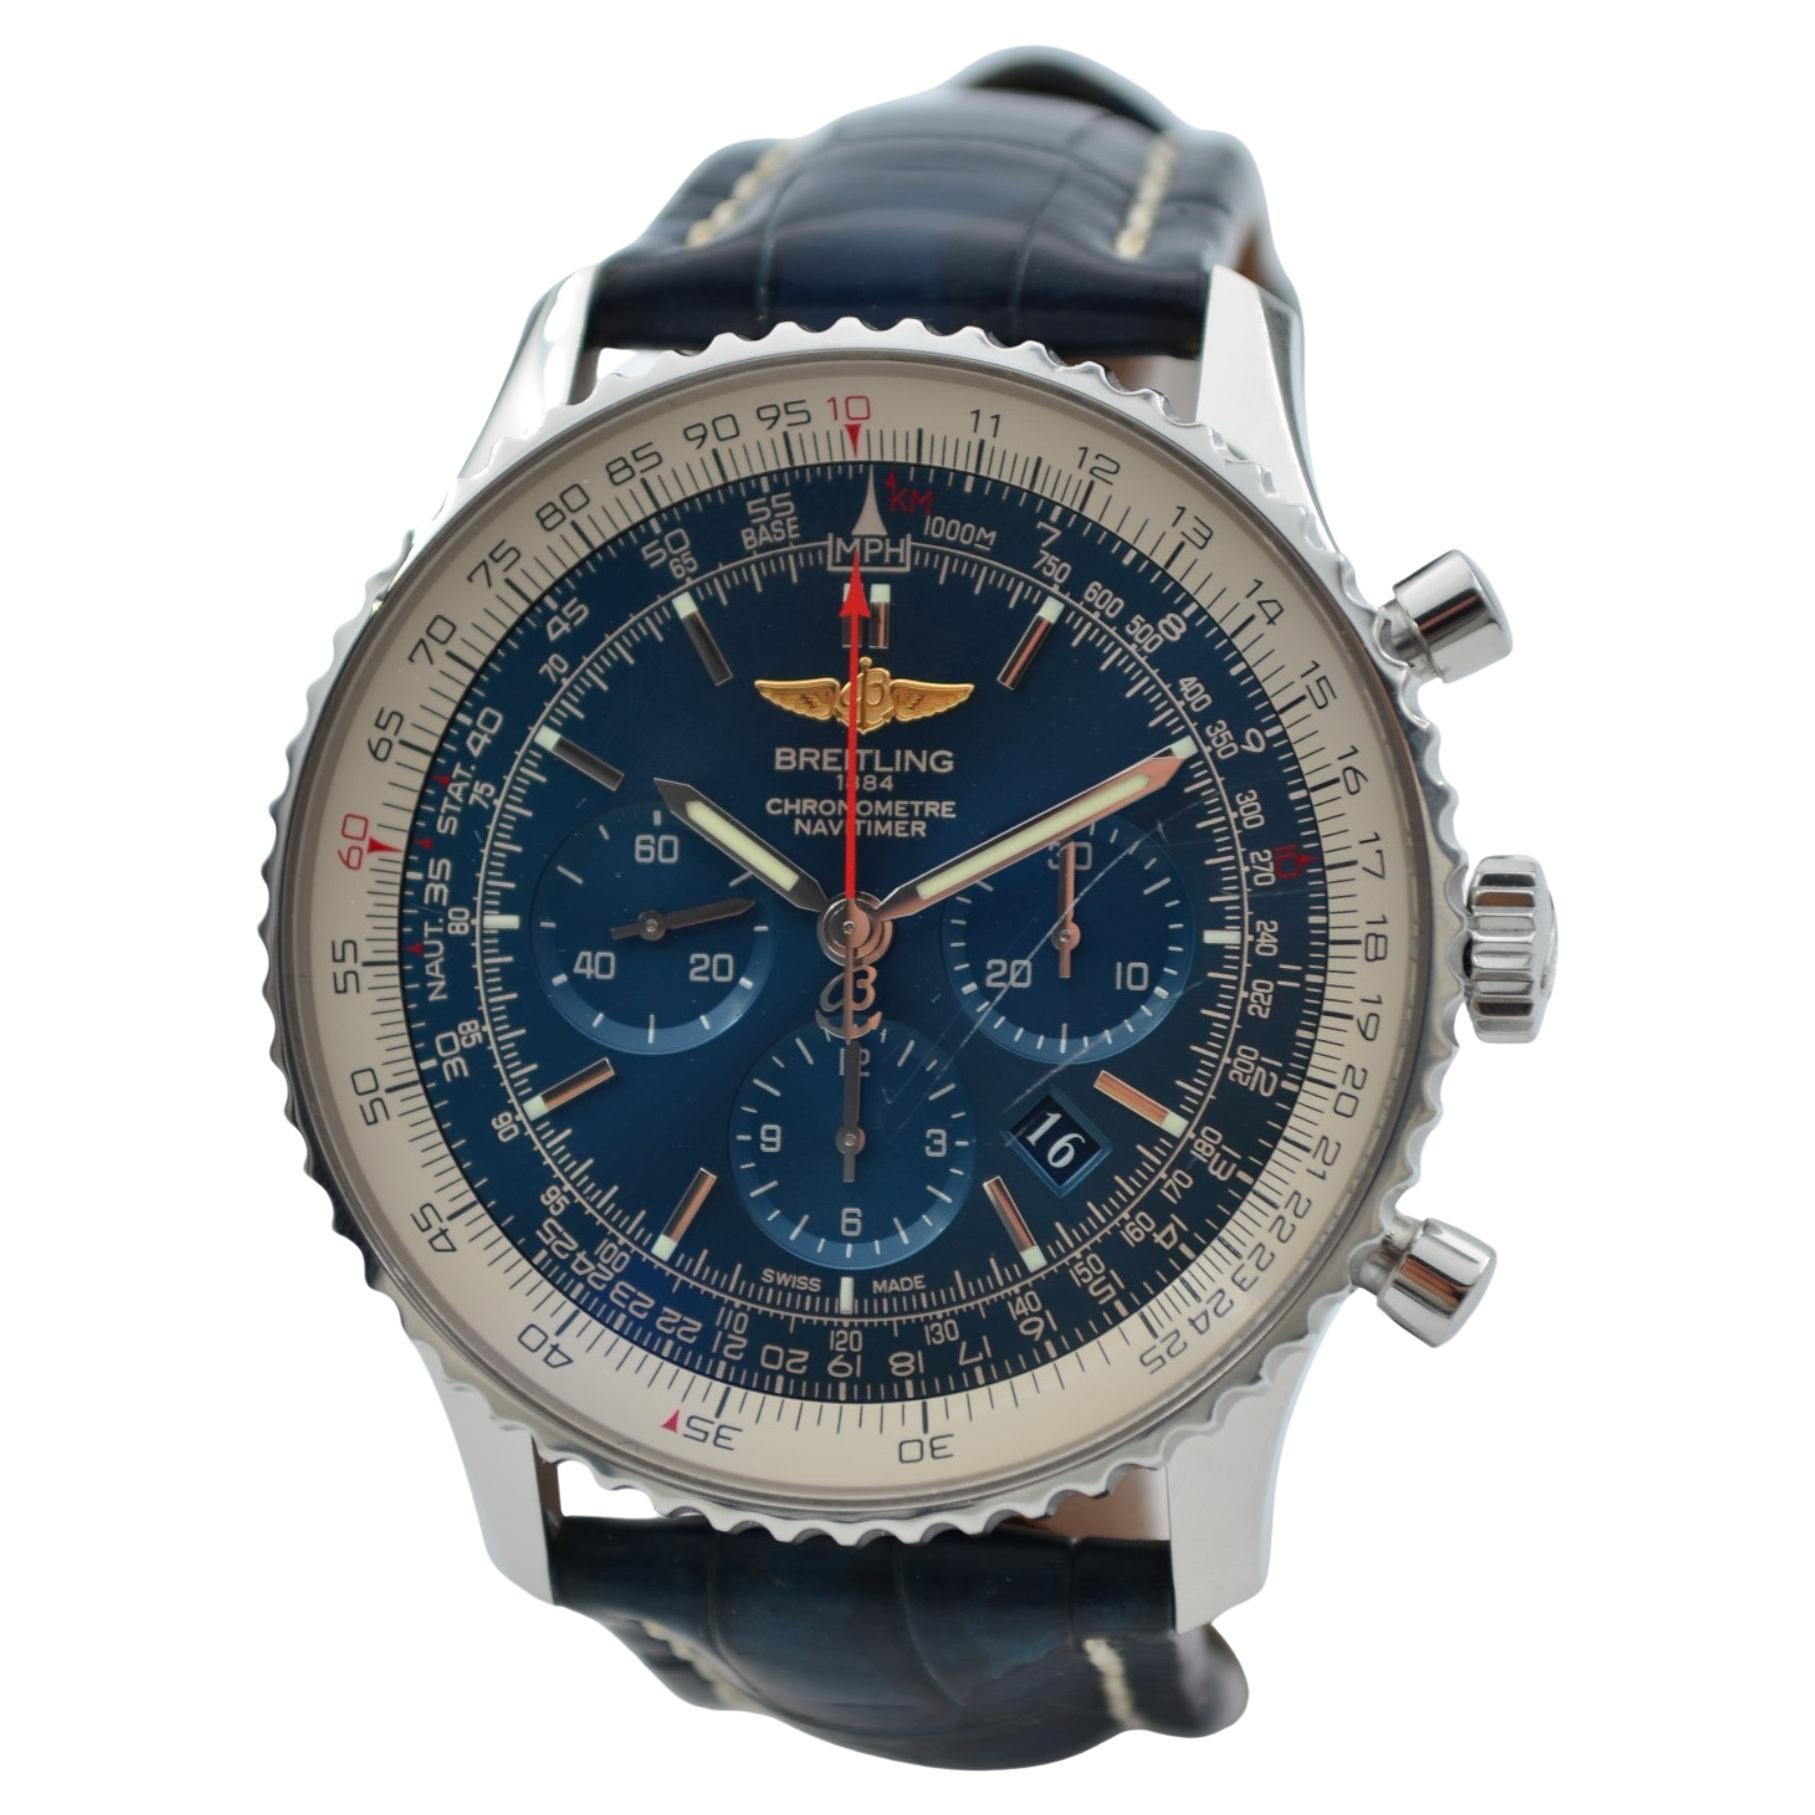 Breitling Navitimer 1 Chronograph 46mm Steel Blue Dial Leather Strap AB012721